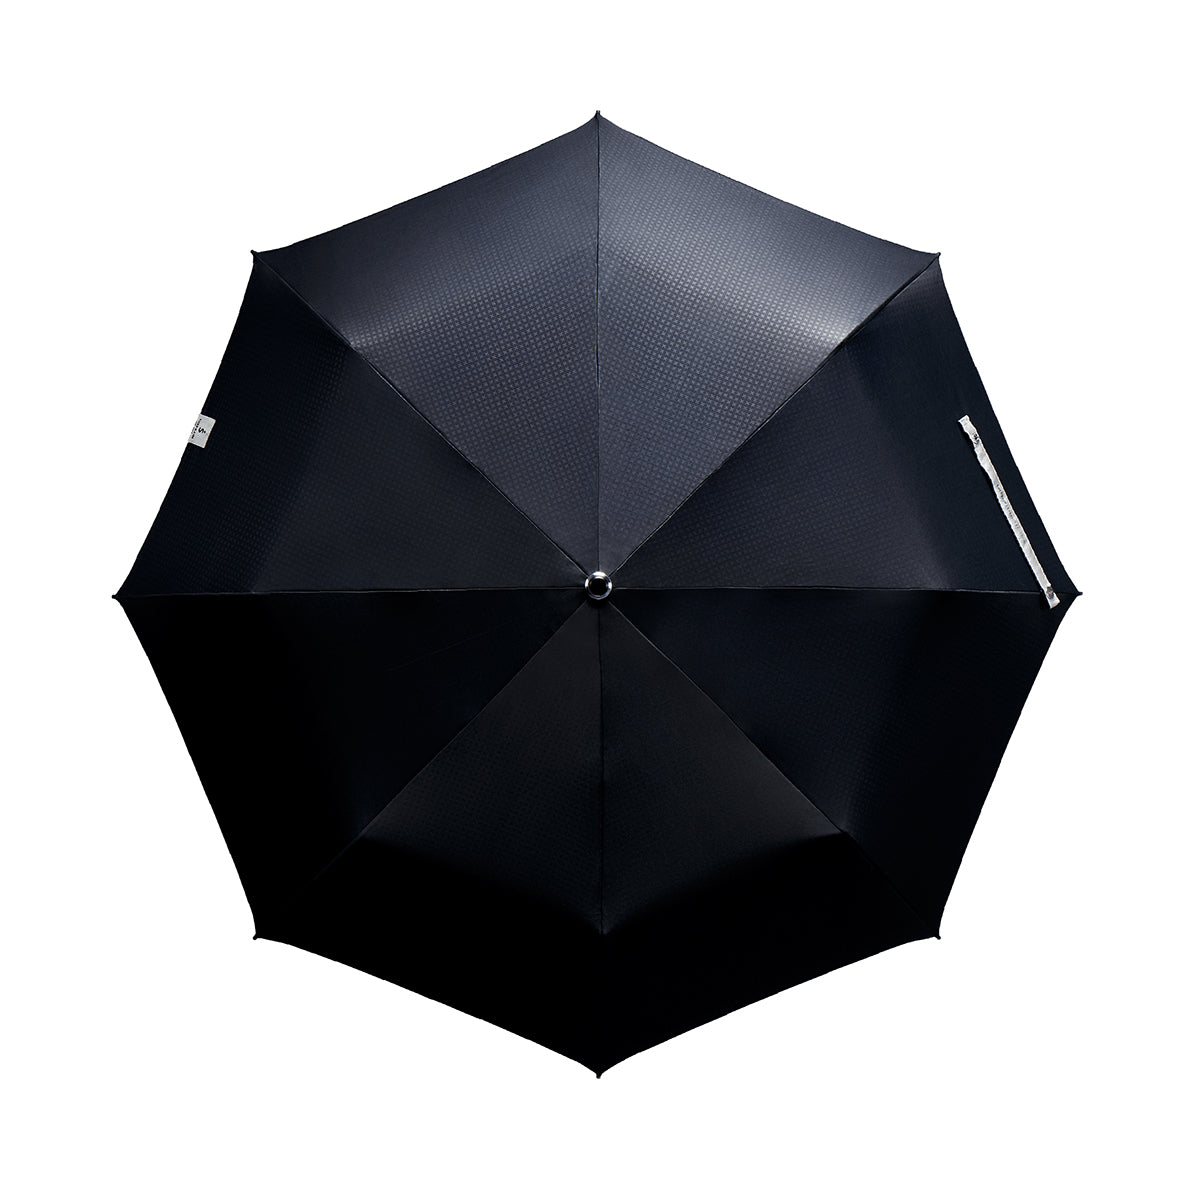 topical view of a handmade manual open compact luxury umbrella with a glossy piano finish bright white handle, detachable waxed cotton wrist strap, Teflon-coated fine denier woven black polyester twill canopy, chrome trim, Trilobe aircraft aluminum shaft, fiberglass ribs, and a reflective strap embroidered with “ShedRain Stratus.”